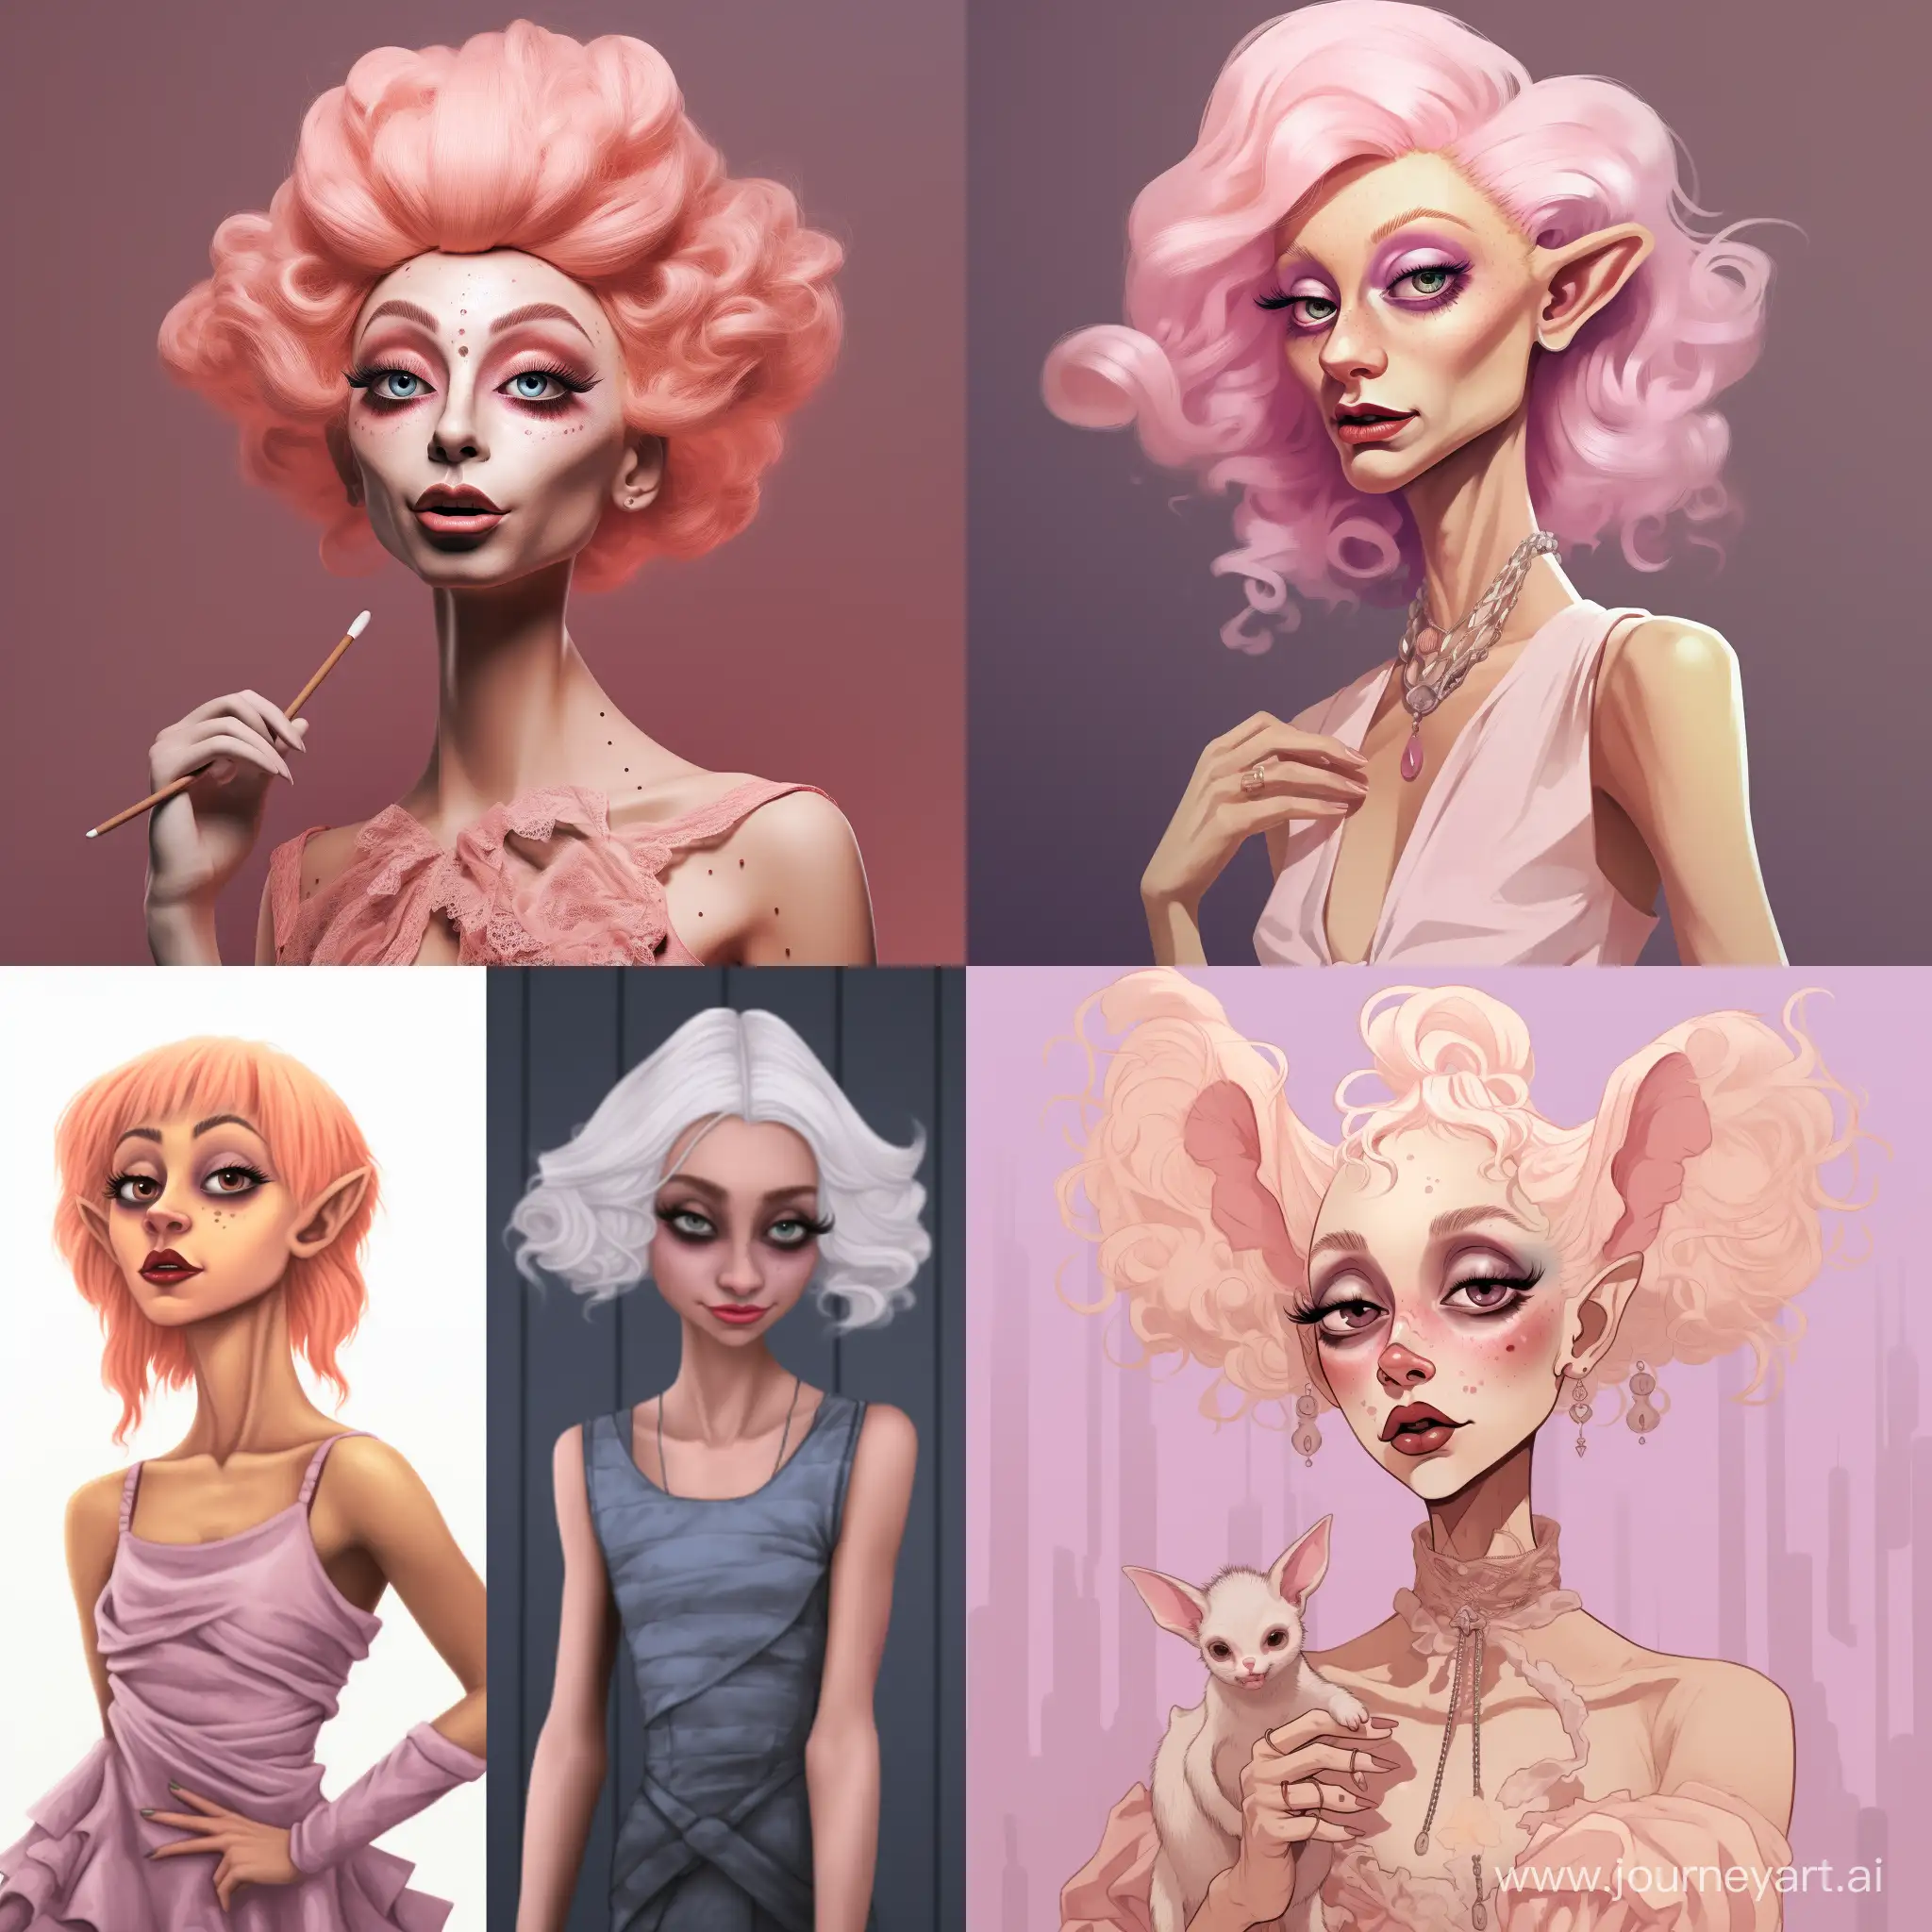 Dobby-the-Drag-Queen-Whimsical-Cartoon-Transformation-Inspired-by-Harry-Potter